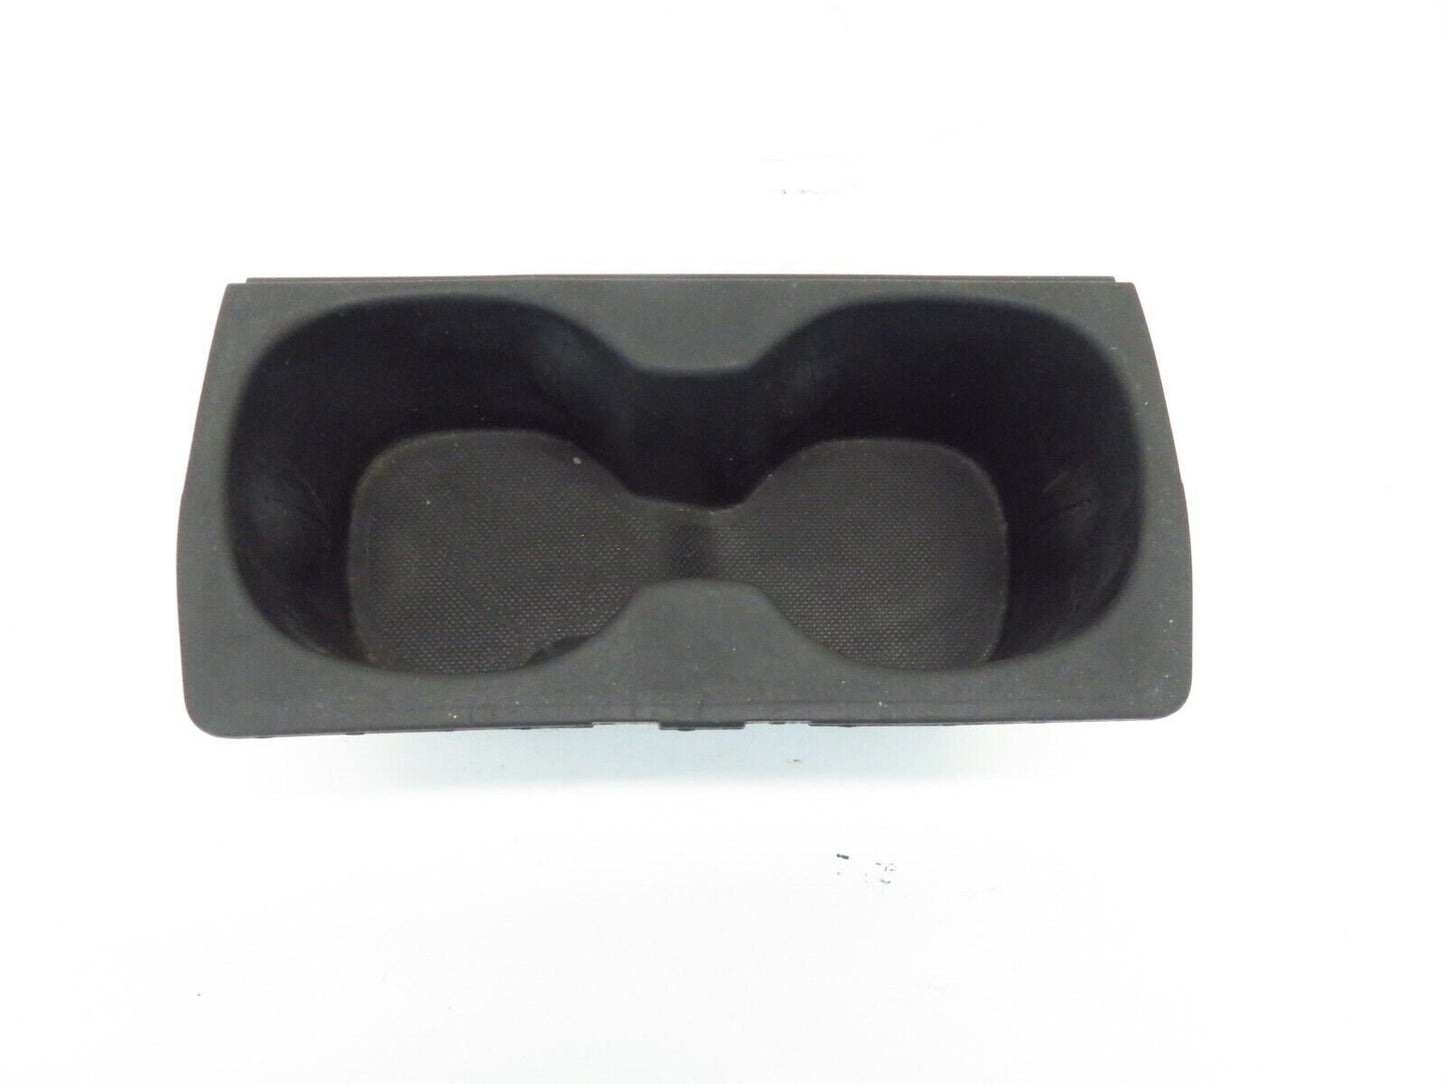 2018-2020 Buick Regal TourX Center Console Cupholder Cup Holder Insert 18-20